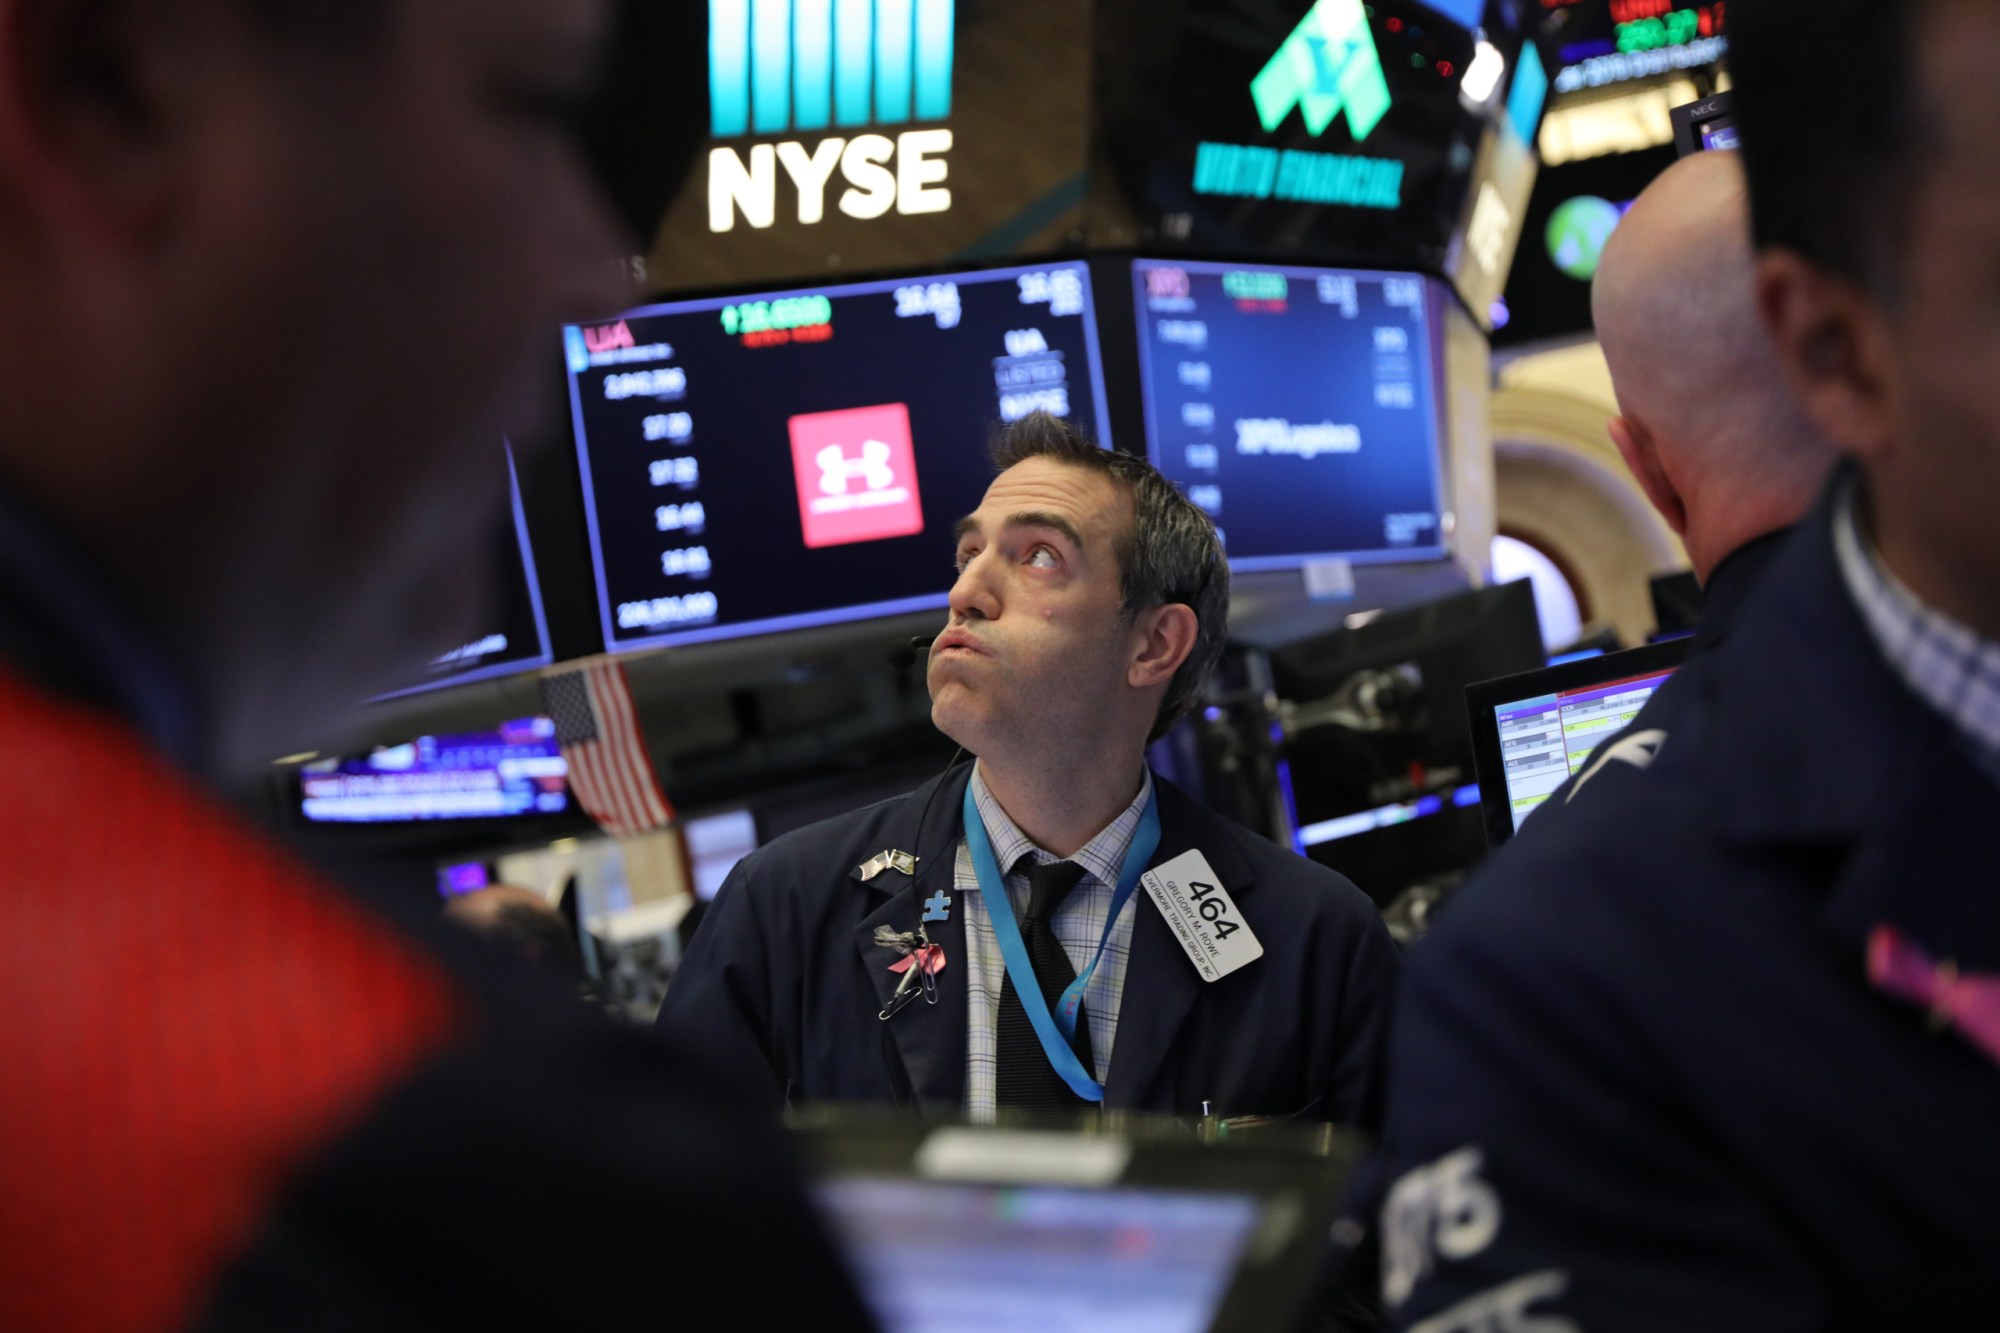 Traders work on the floor of the New York Stock Exchange on December 19, 2018, in New York City, when U.S. stocks fell after the Federal Reserve raised interest rates for the fourth time in 2018. (Getty/Spencer Platt)